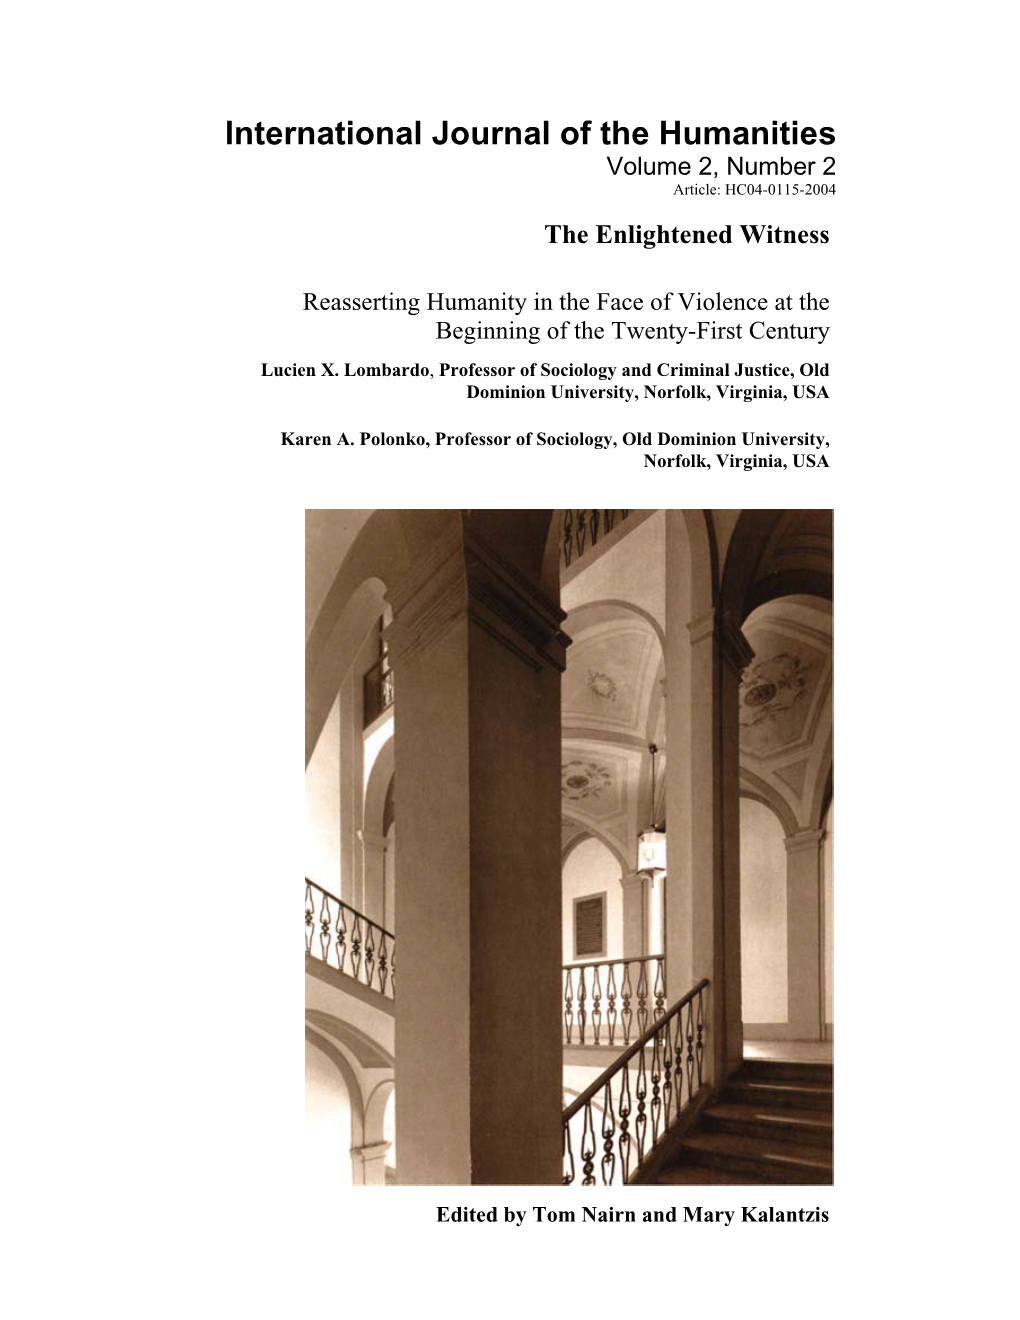 International Journal of the Humanities Volume 2, Number 2 Article: HC04-0115-2004 the Enlightened Witness